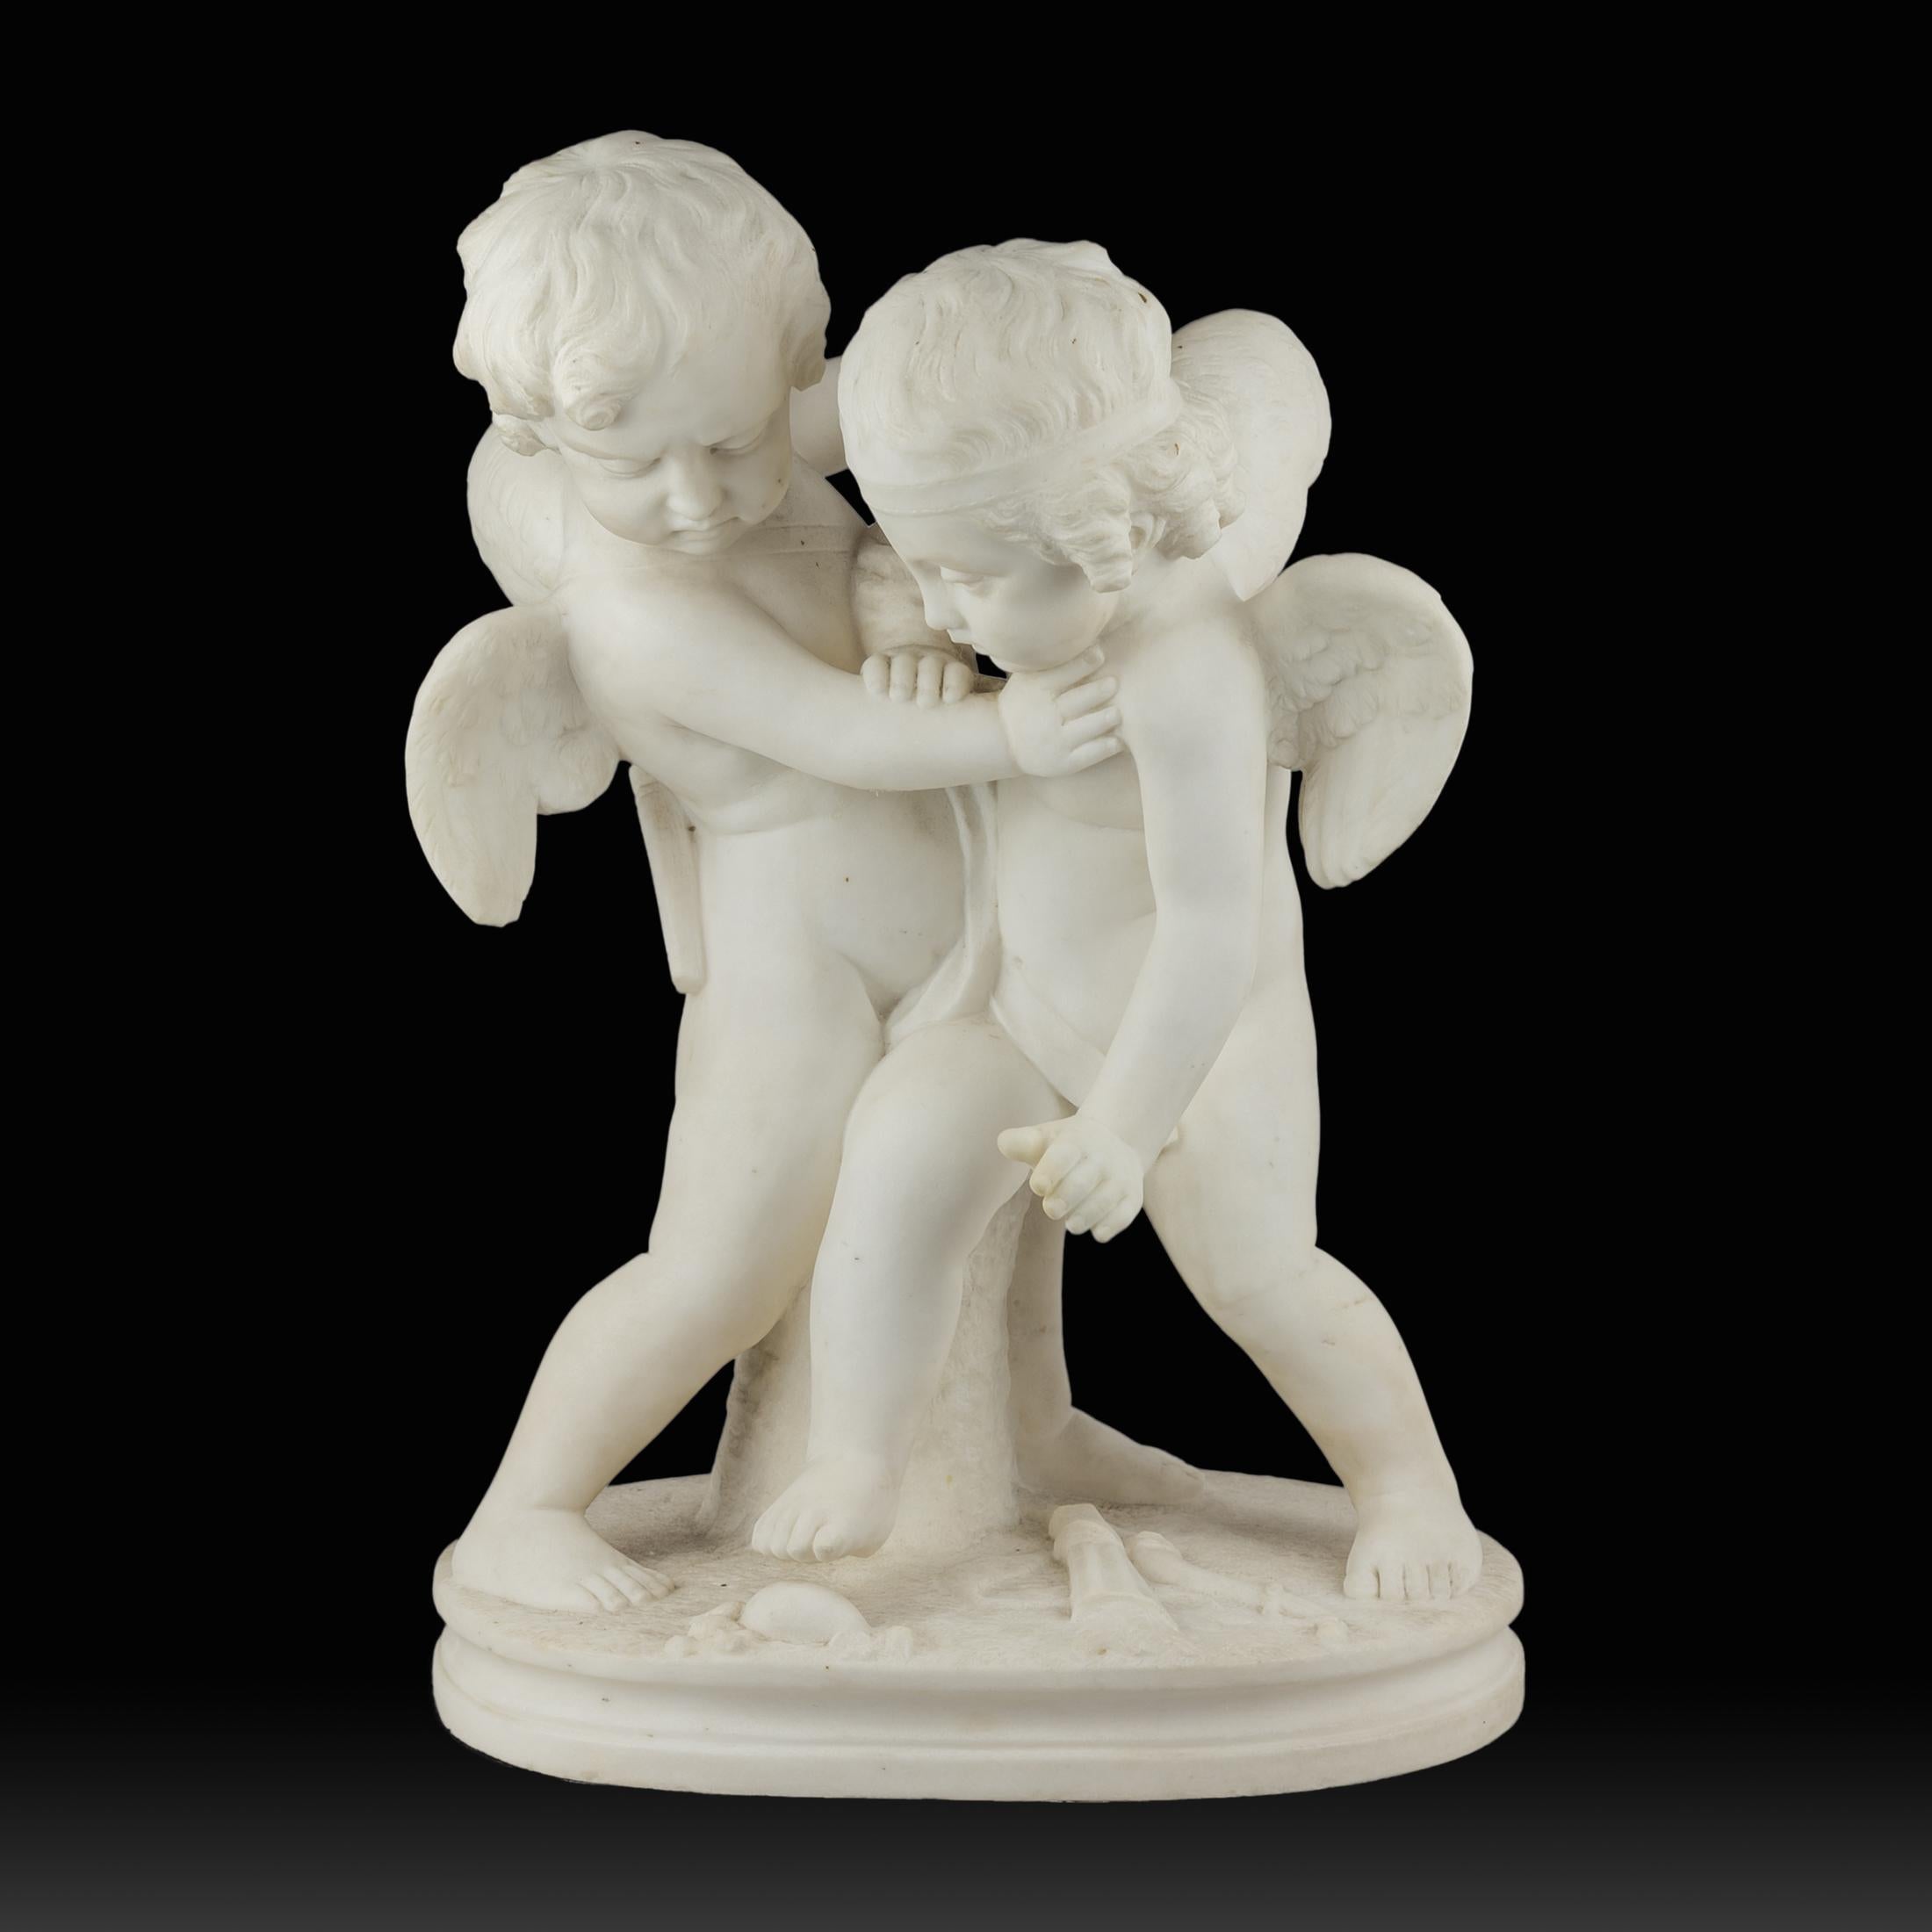 Unknown Figurative Sculpture - White Marble Sculpture Statue of Two Cherubs Playing